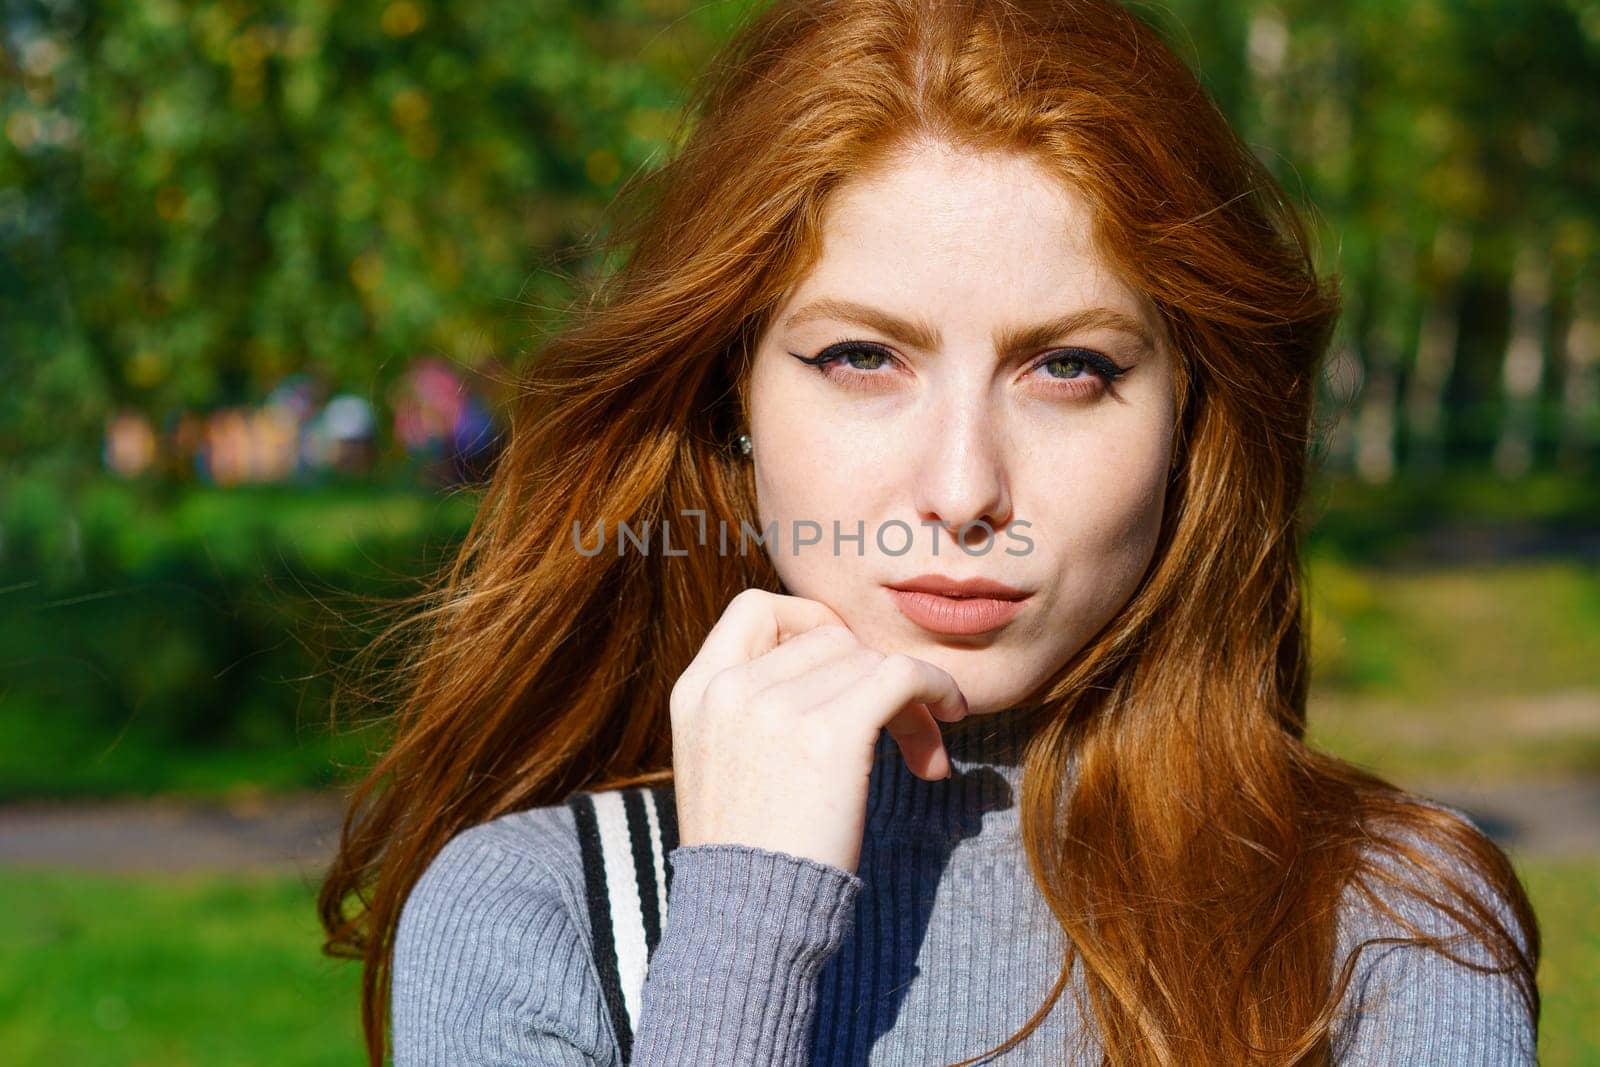 Closeup female portrait of a red-haired Caucasian woman with makeup, with green eyes looking at the camera on a natural background on a sunny day